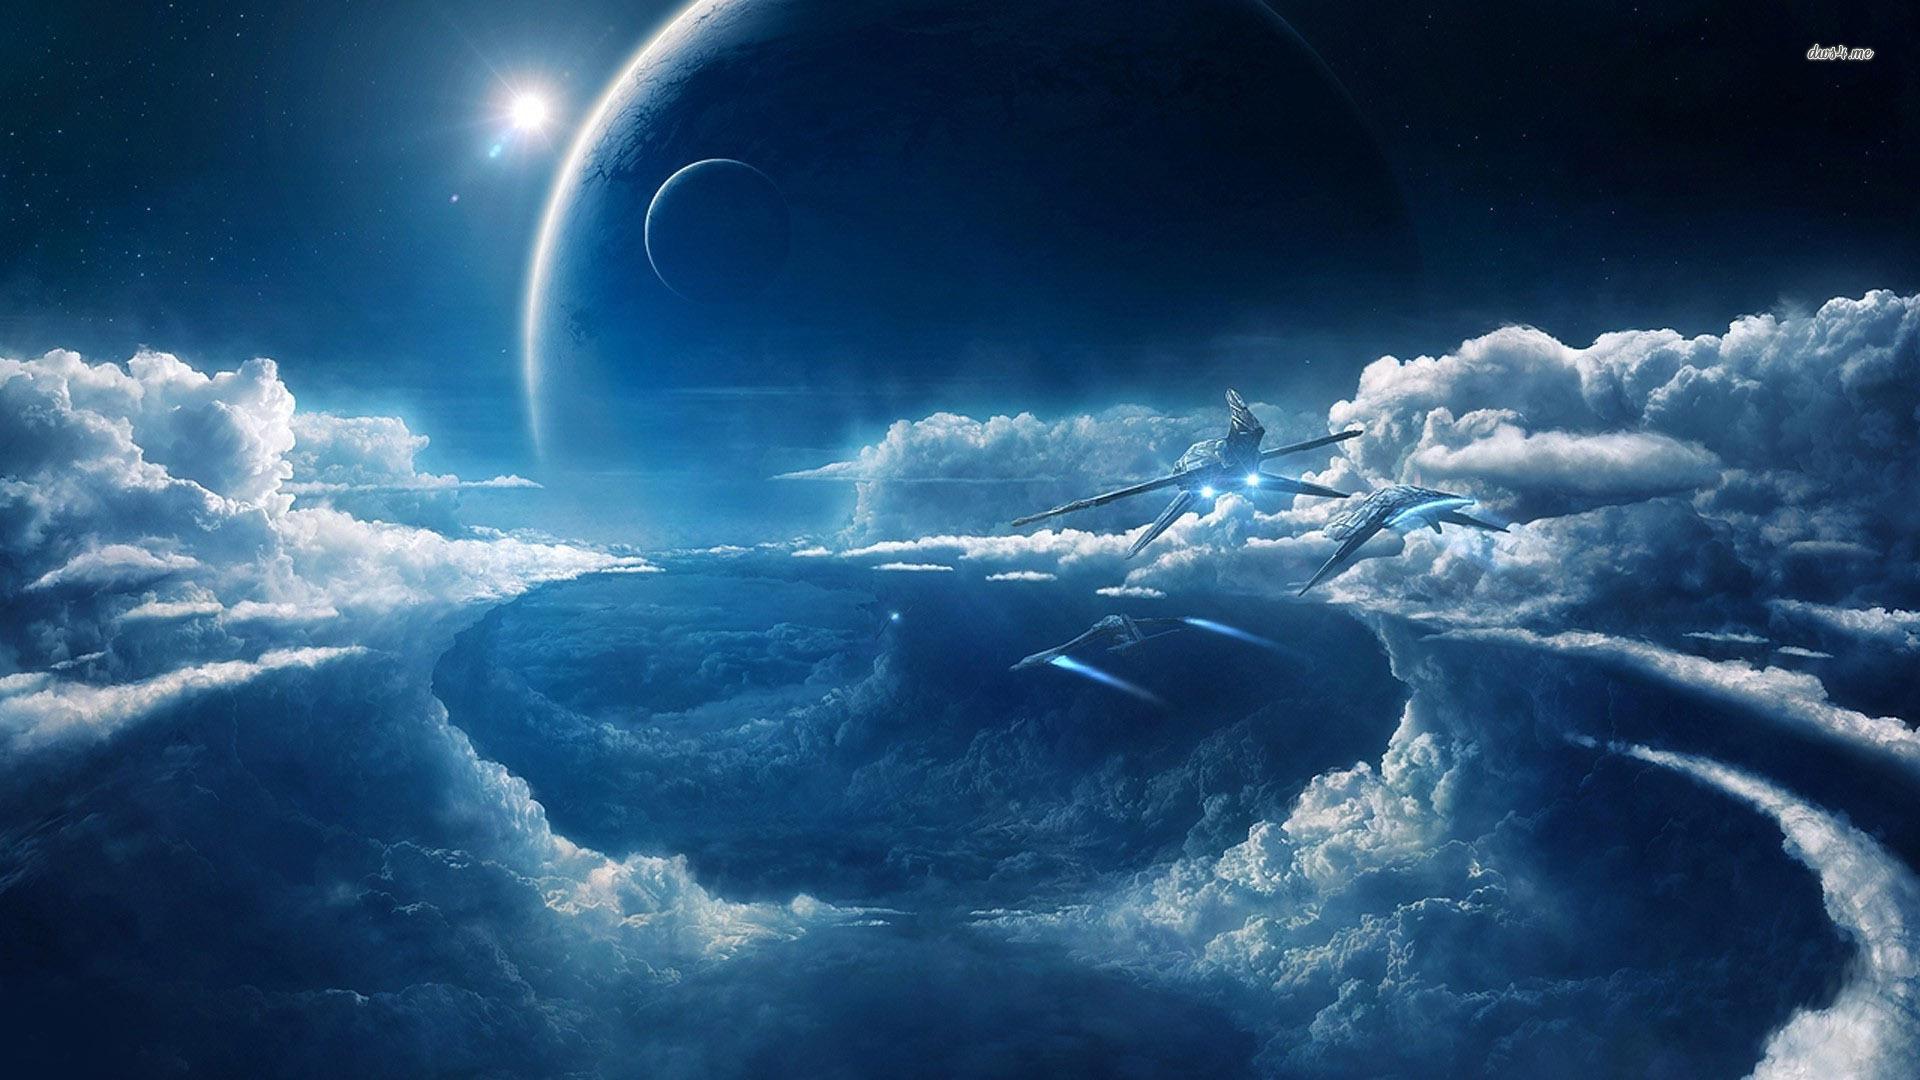 Spaceships over the clouds wallpaper wallpaper